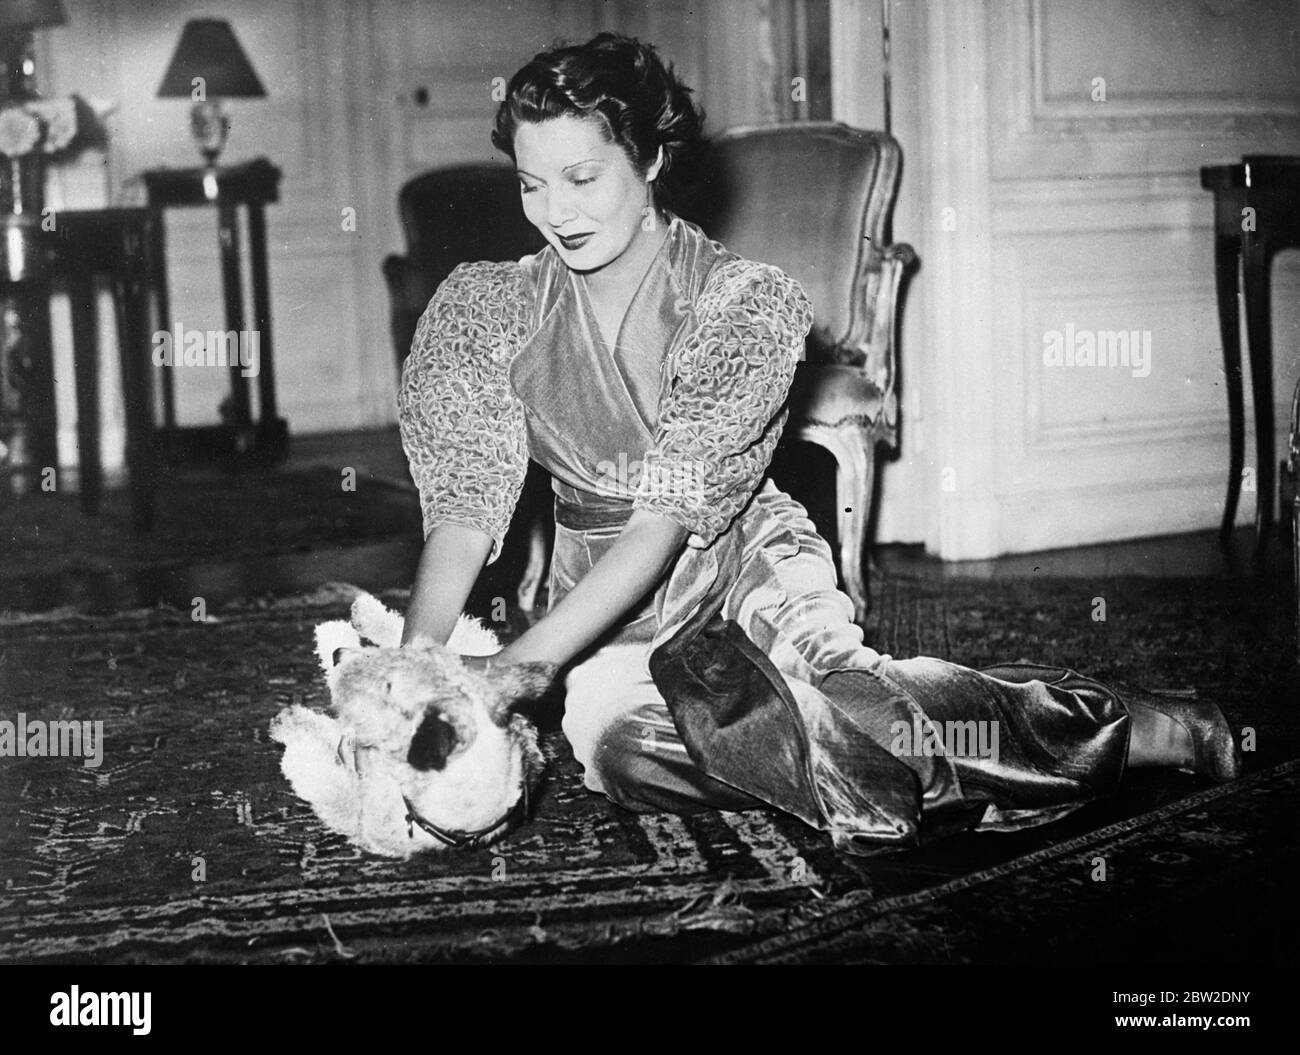 A 17-year-old girl, Mlle Jacqueline Janet, (pictured playing with her pet dog at her Paris flat) granddaughter of the famous savant Paul Janet, has been elected as miss France and will compete against international beauties for the title miss Europe at the end of this month 10 October 1937. Stock Photo